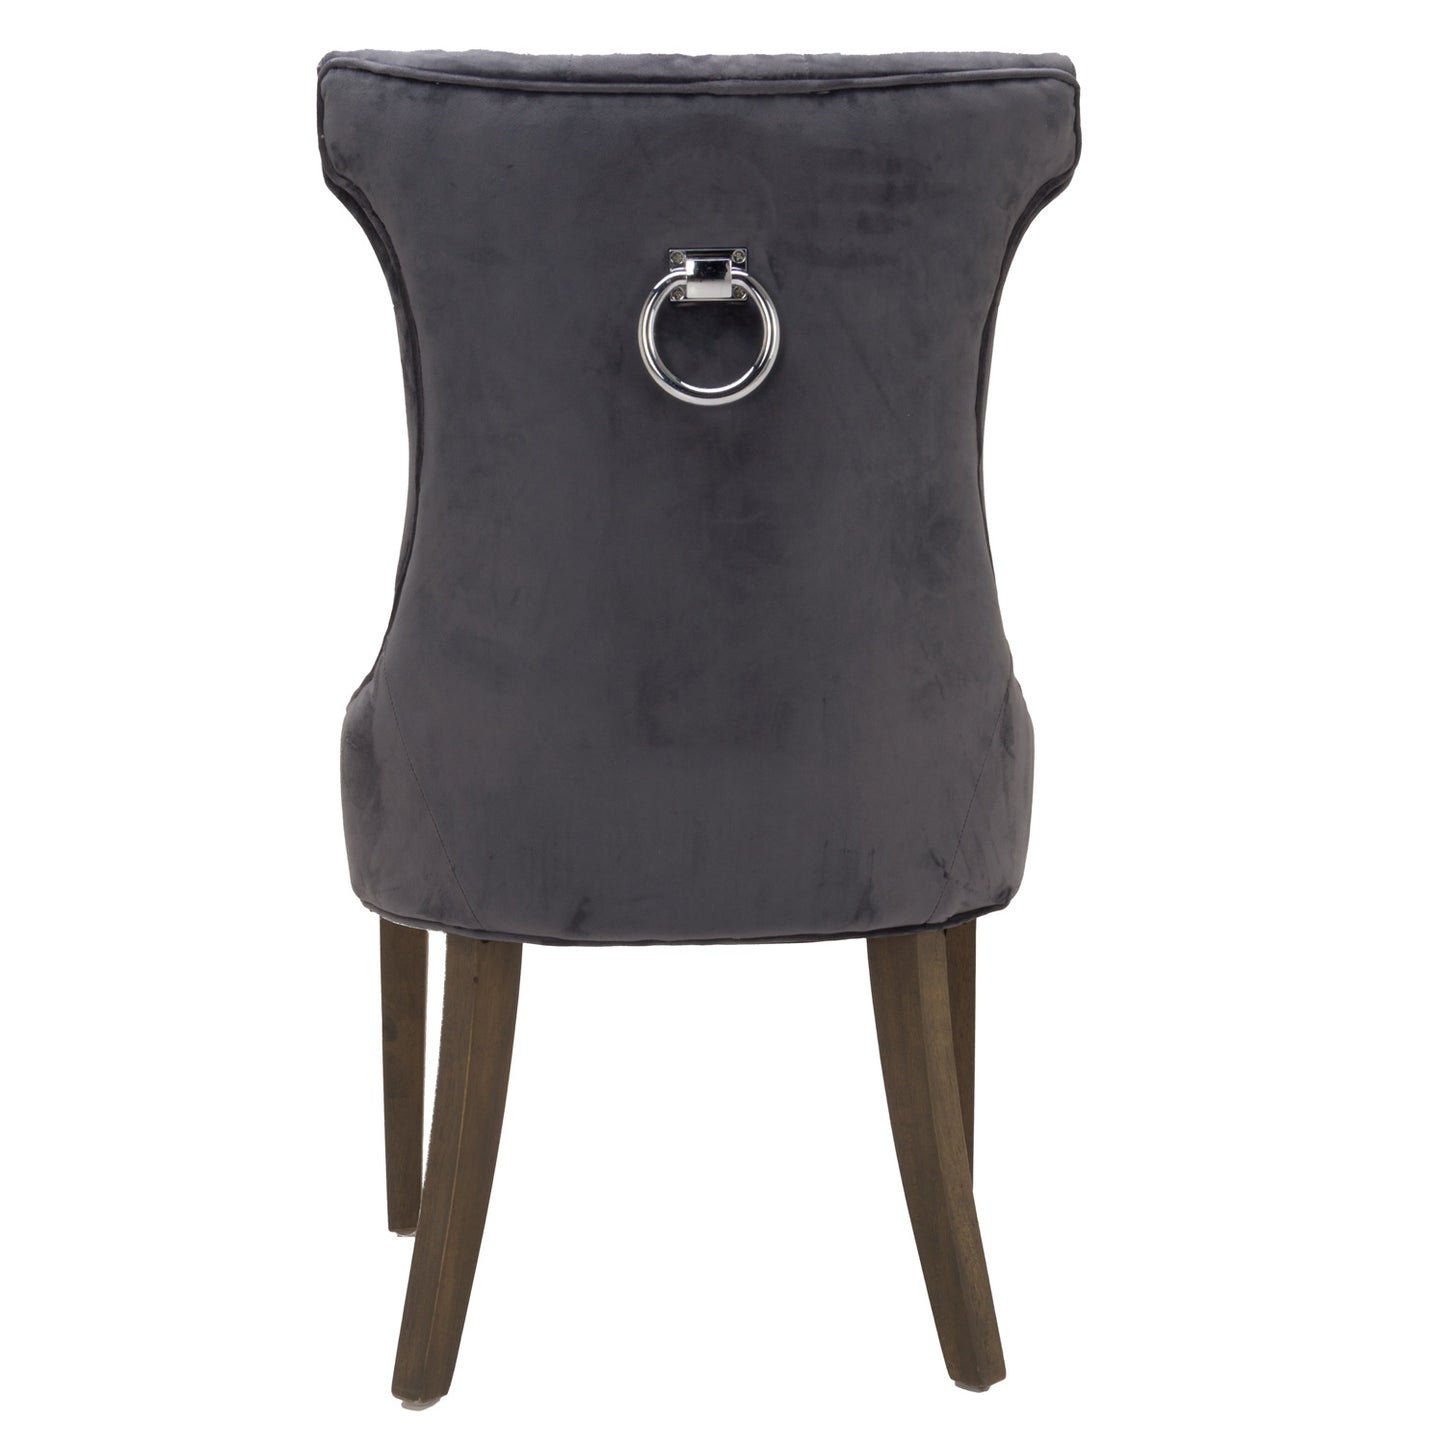 Knightsbridge Grey High Wing Ring Backed Dining Chair